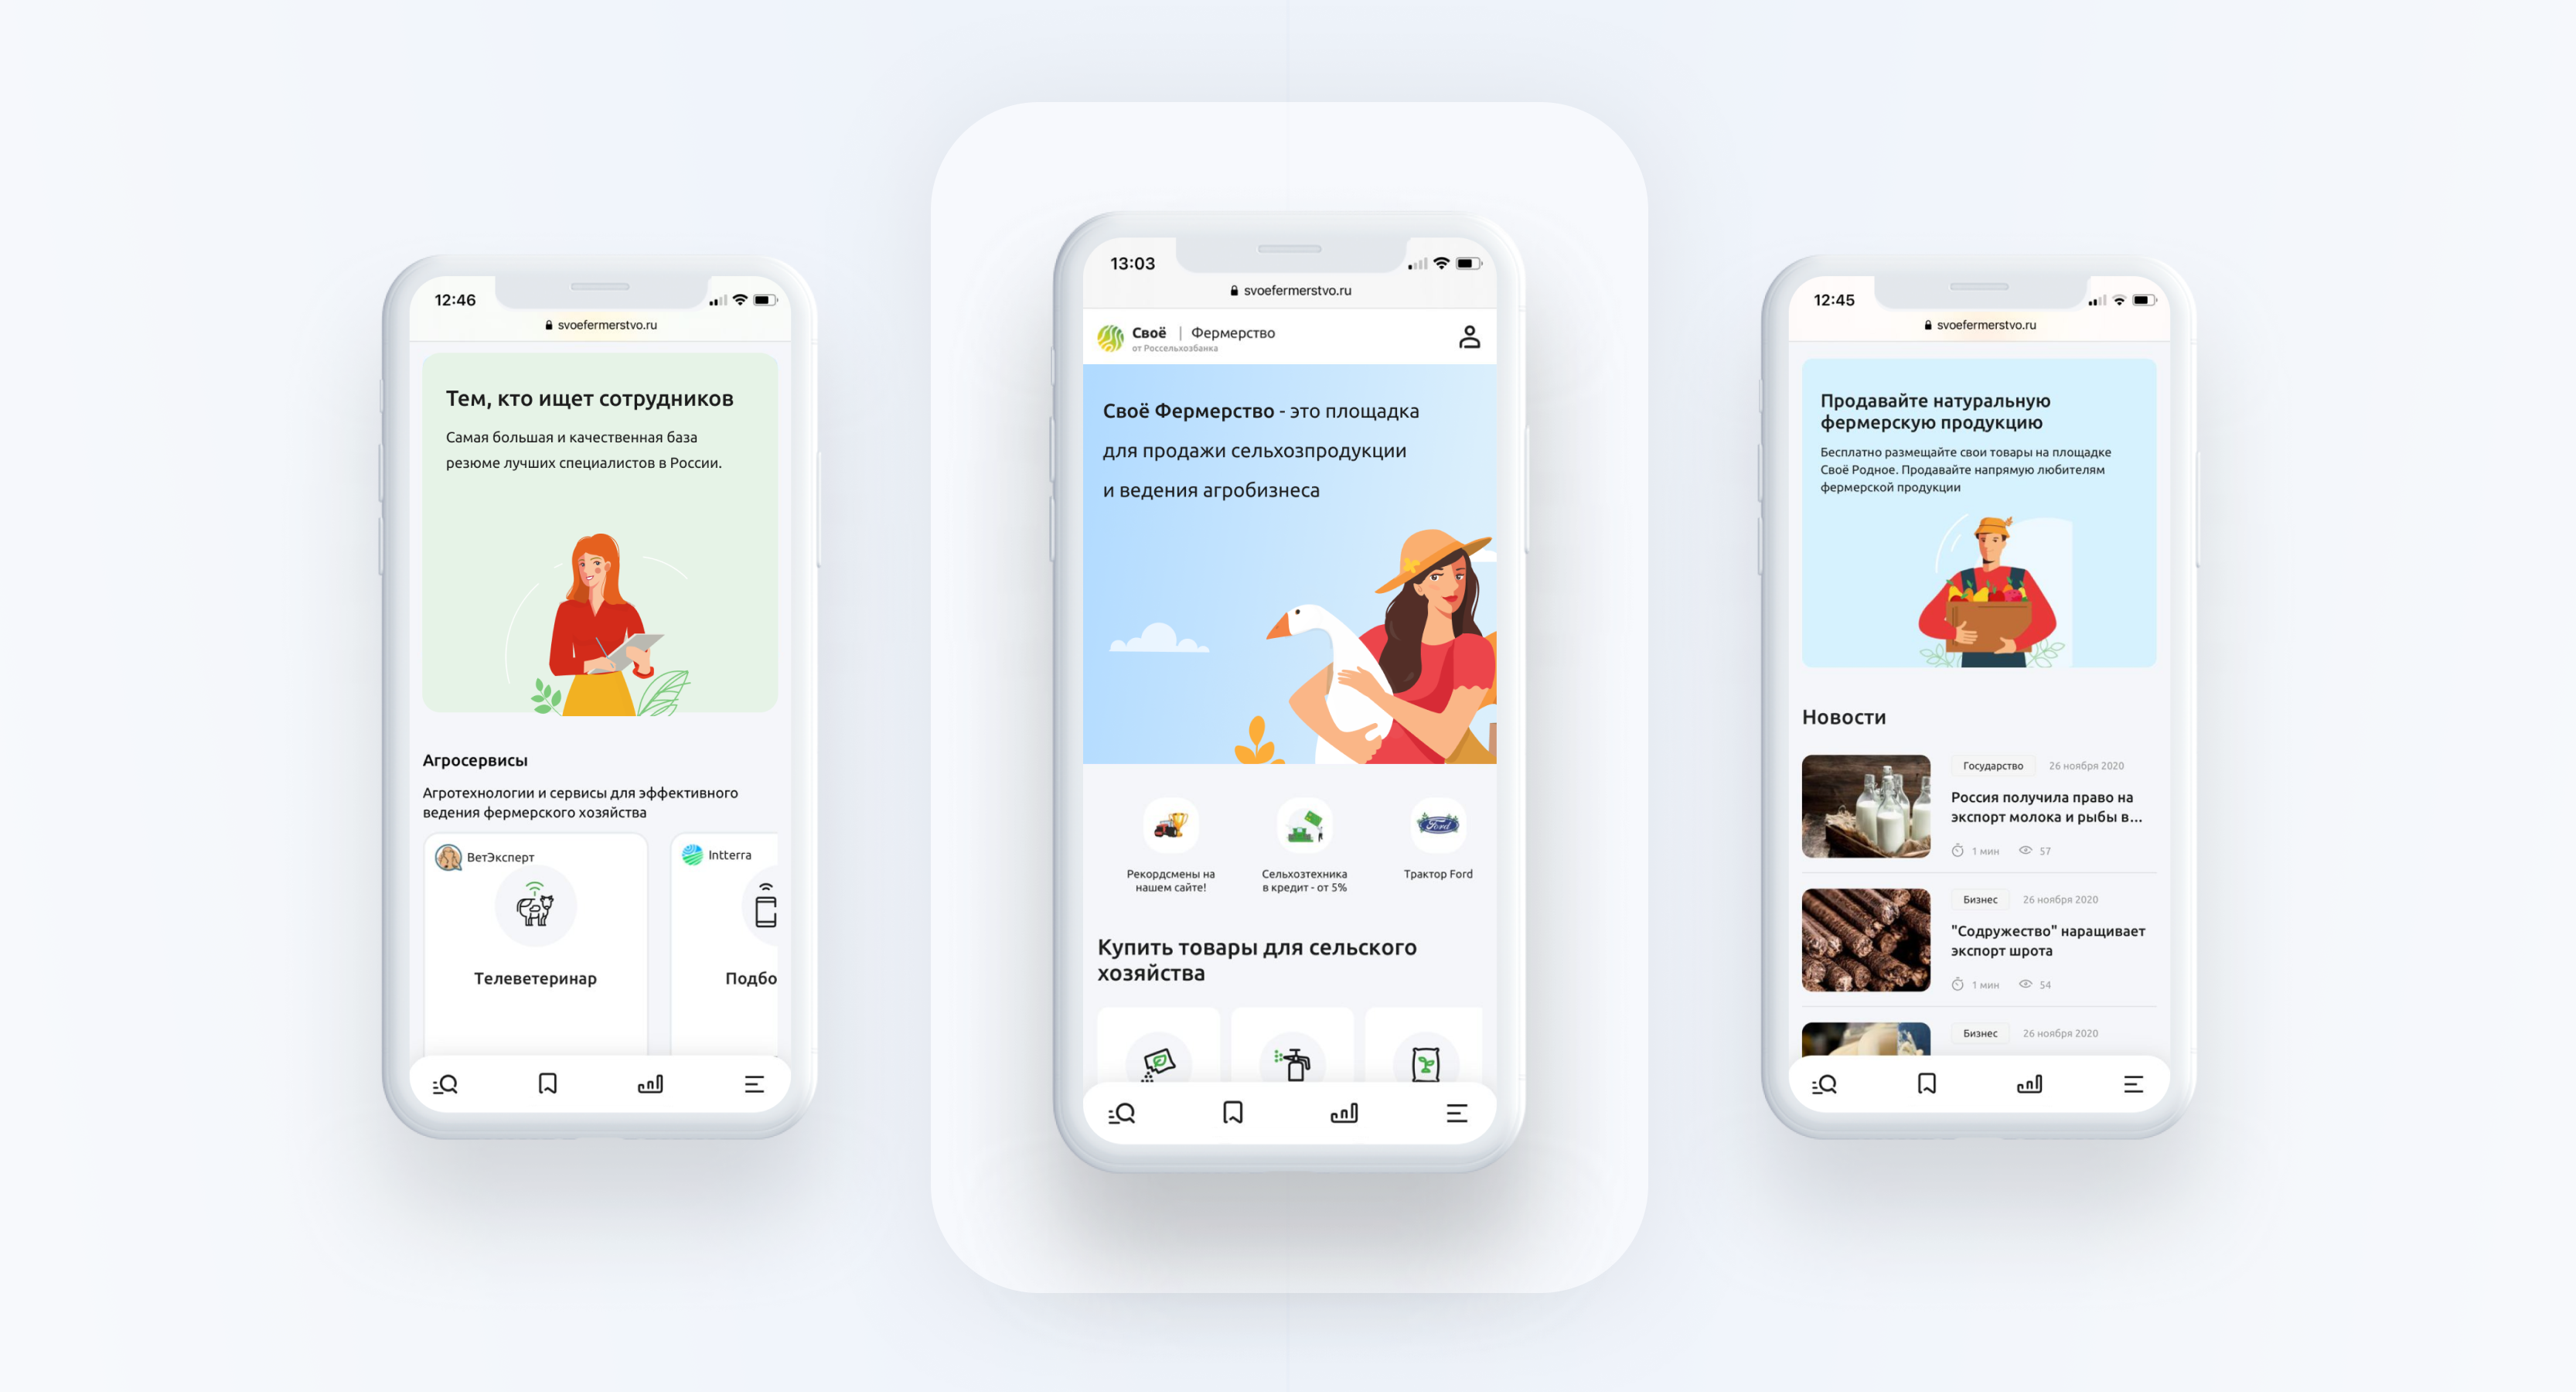 image of Joint stock company Russian Agricultural Bank, Center for Financial Technology Development  Wins 2020 Best B2B Mobile Website Mobile WebAward for My.Farming